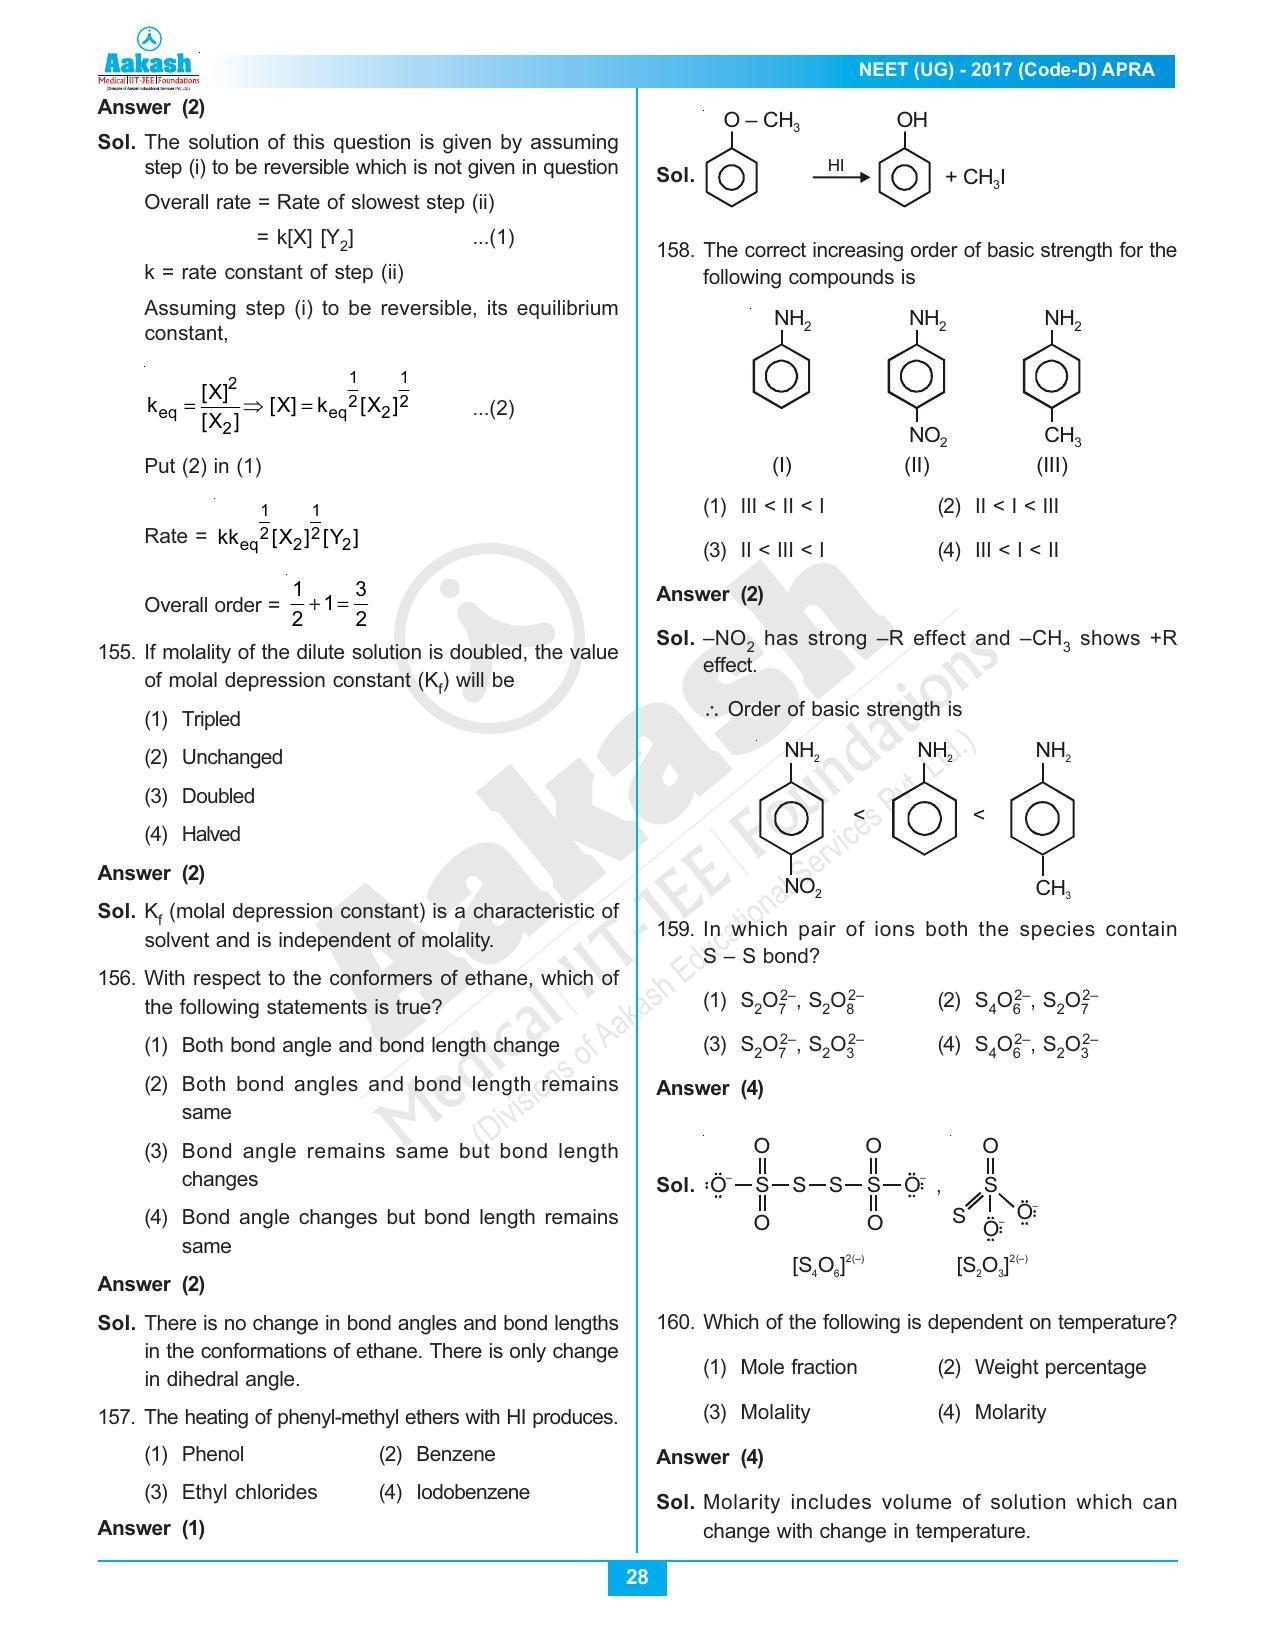  NEET Code D 2017 Answer & Solutions - Page 28